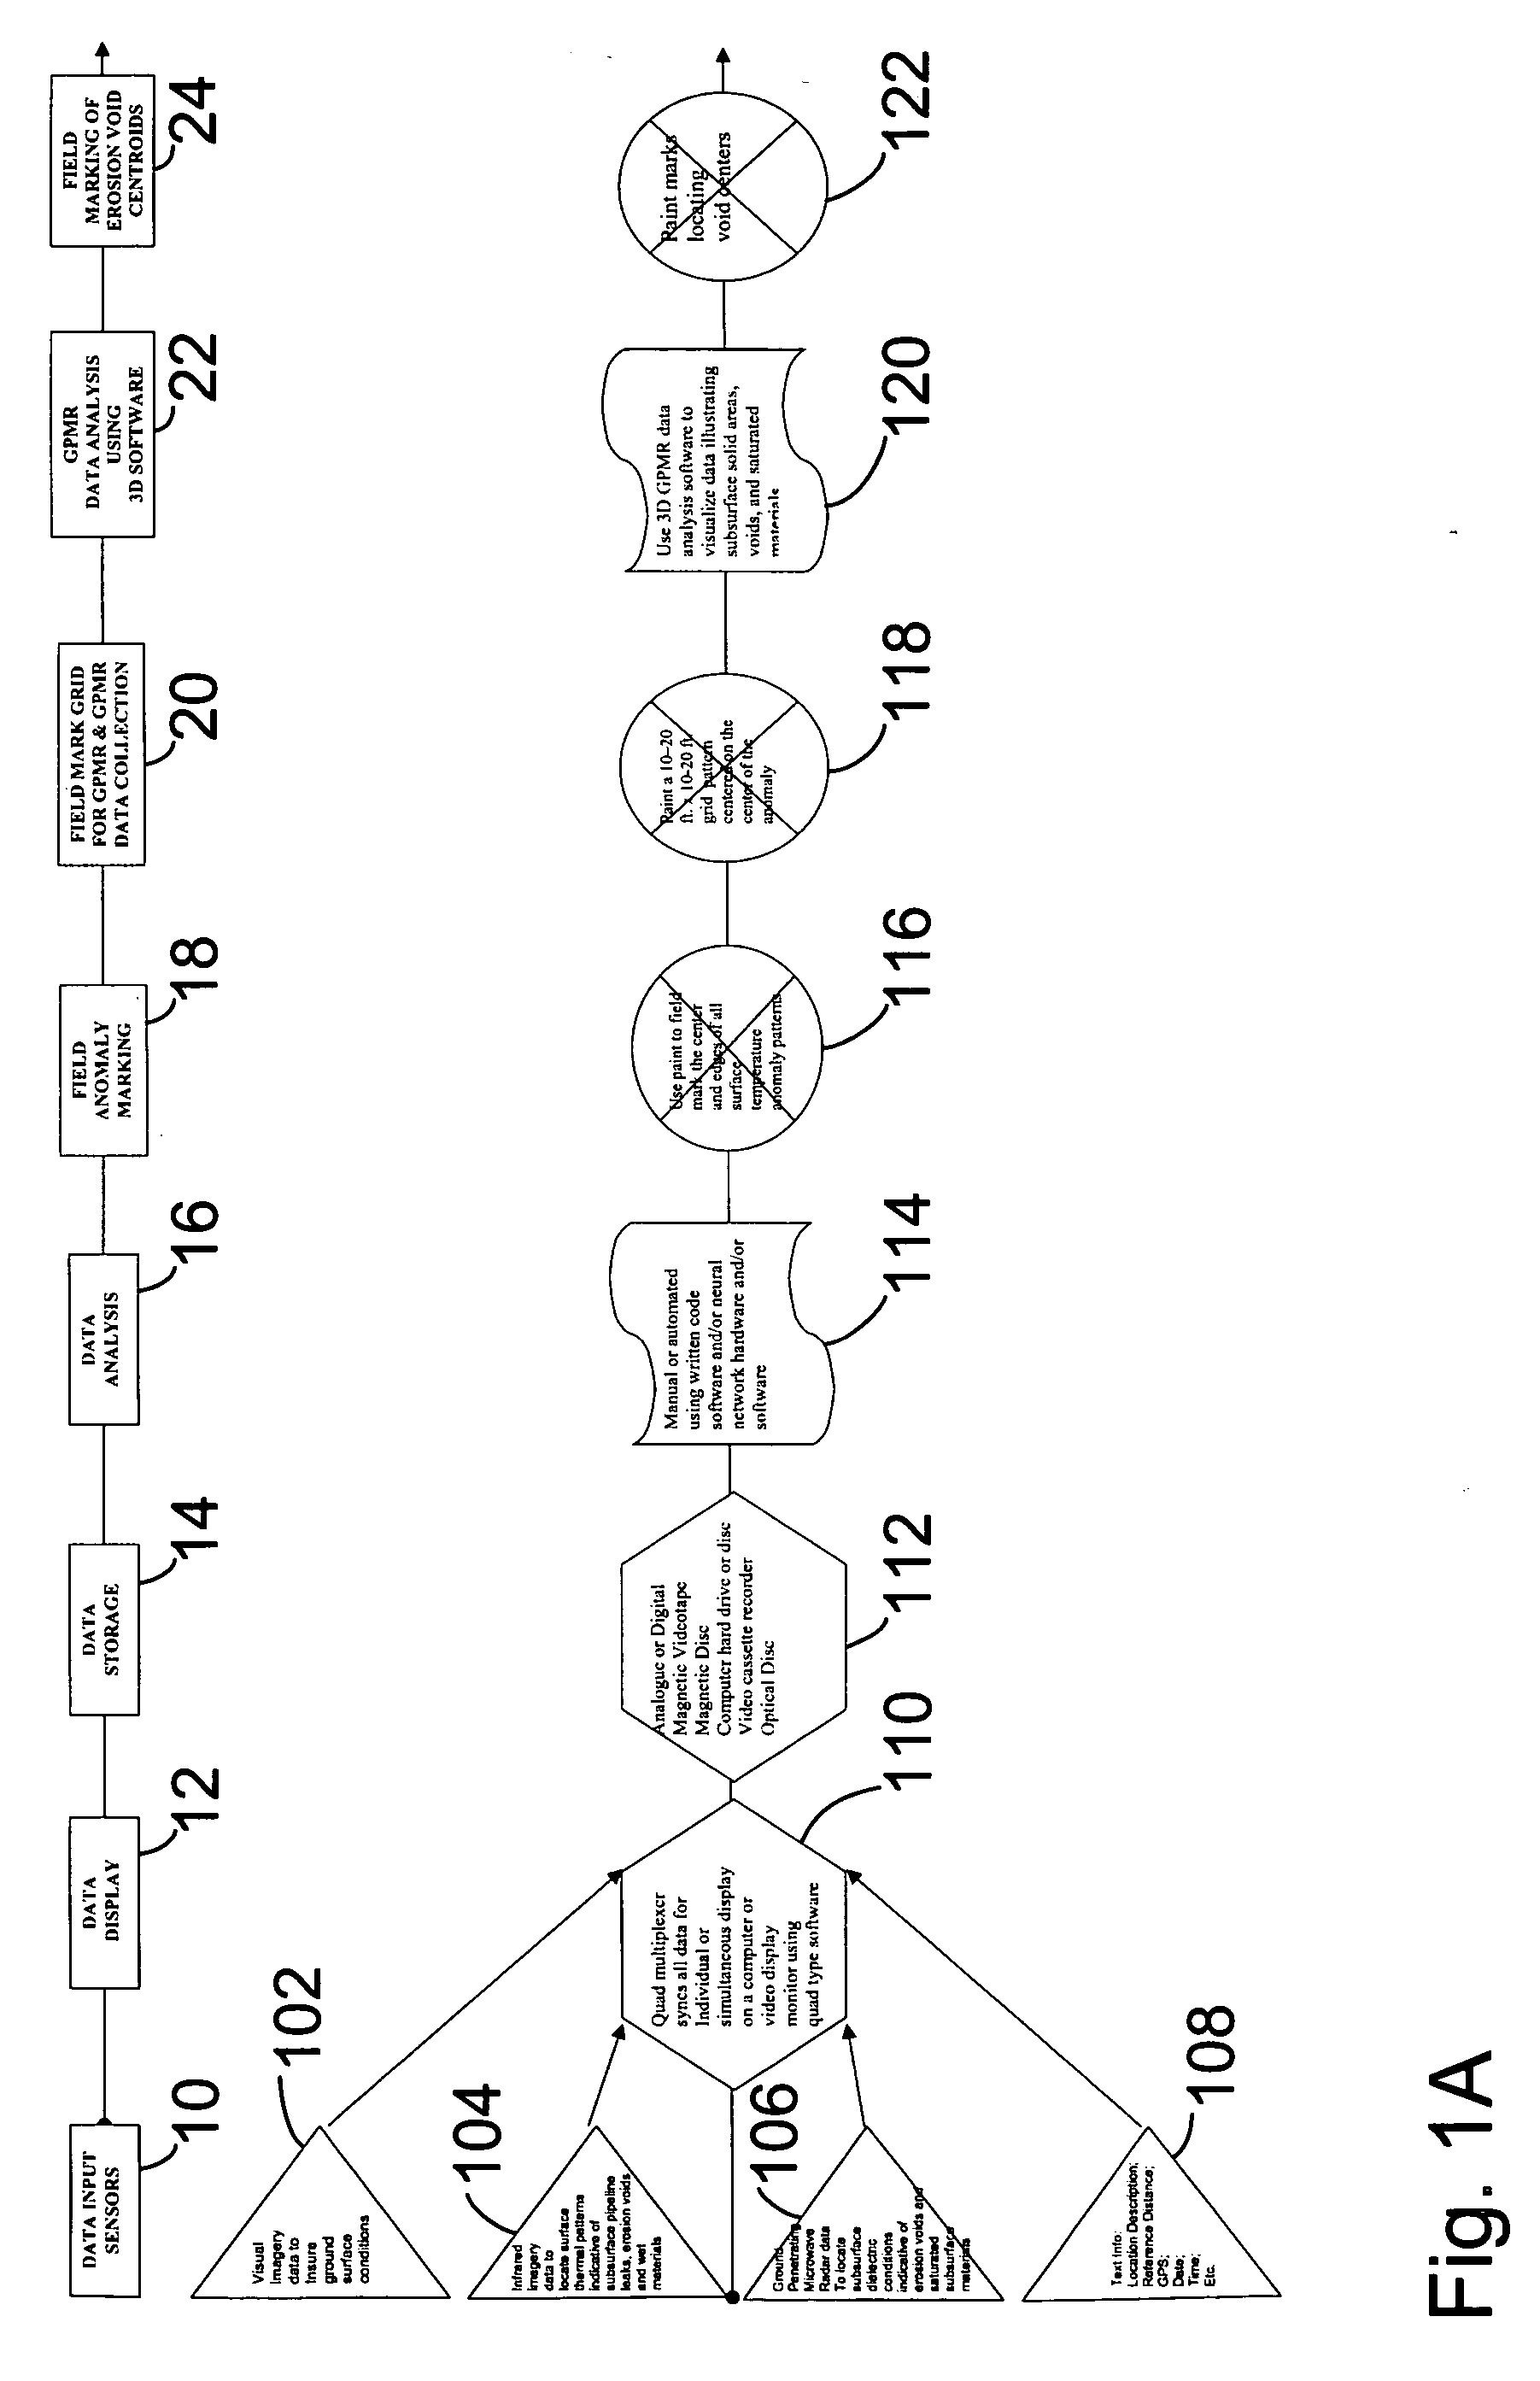 System of subterranean anomaly detection and repair using infrared thermography and ground penetrating radar